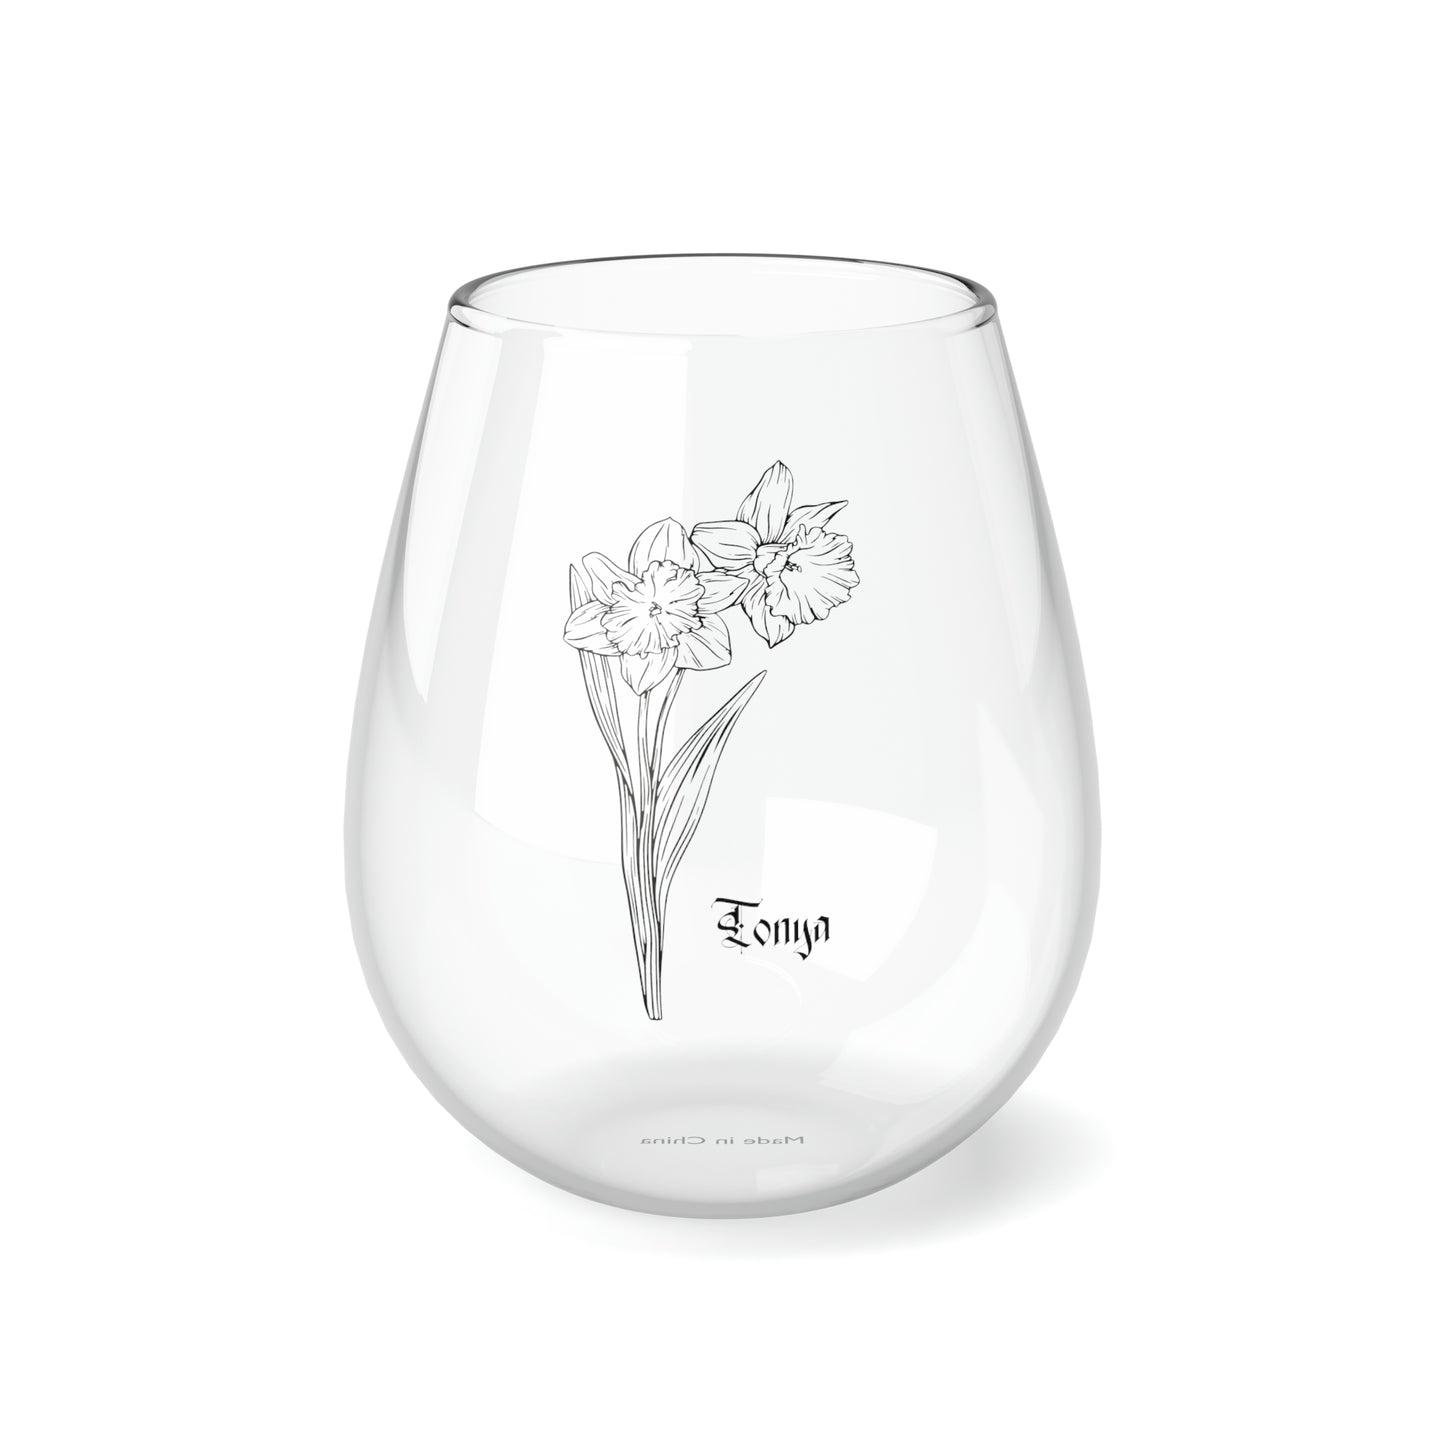 March PERSONALIZED Birth Flower Wine Glass, Birth Flower Gifts, Birth Flower wine glass, Birth Flower Gifts for Women, Gift for coworker, sister gift, birthday gift, Valentine gift, Stemless Wine Glass, 11.75oz